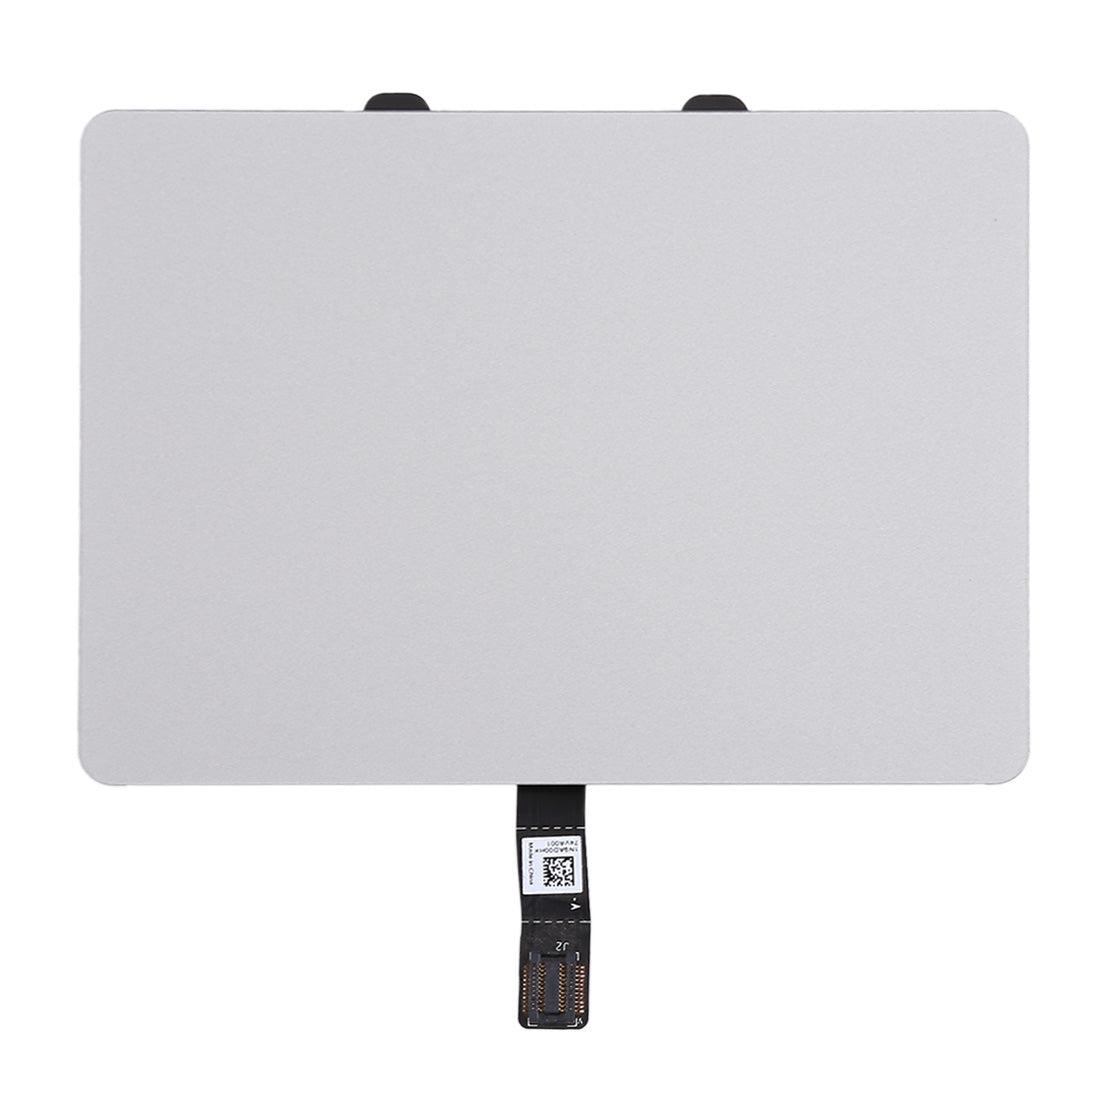 TouchPad Touchpad Apple MacBook Pro 13.3 2009 2012 A1278